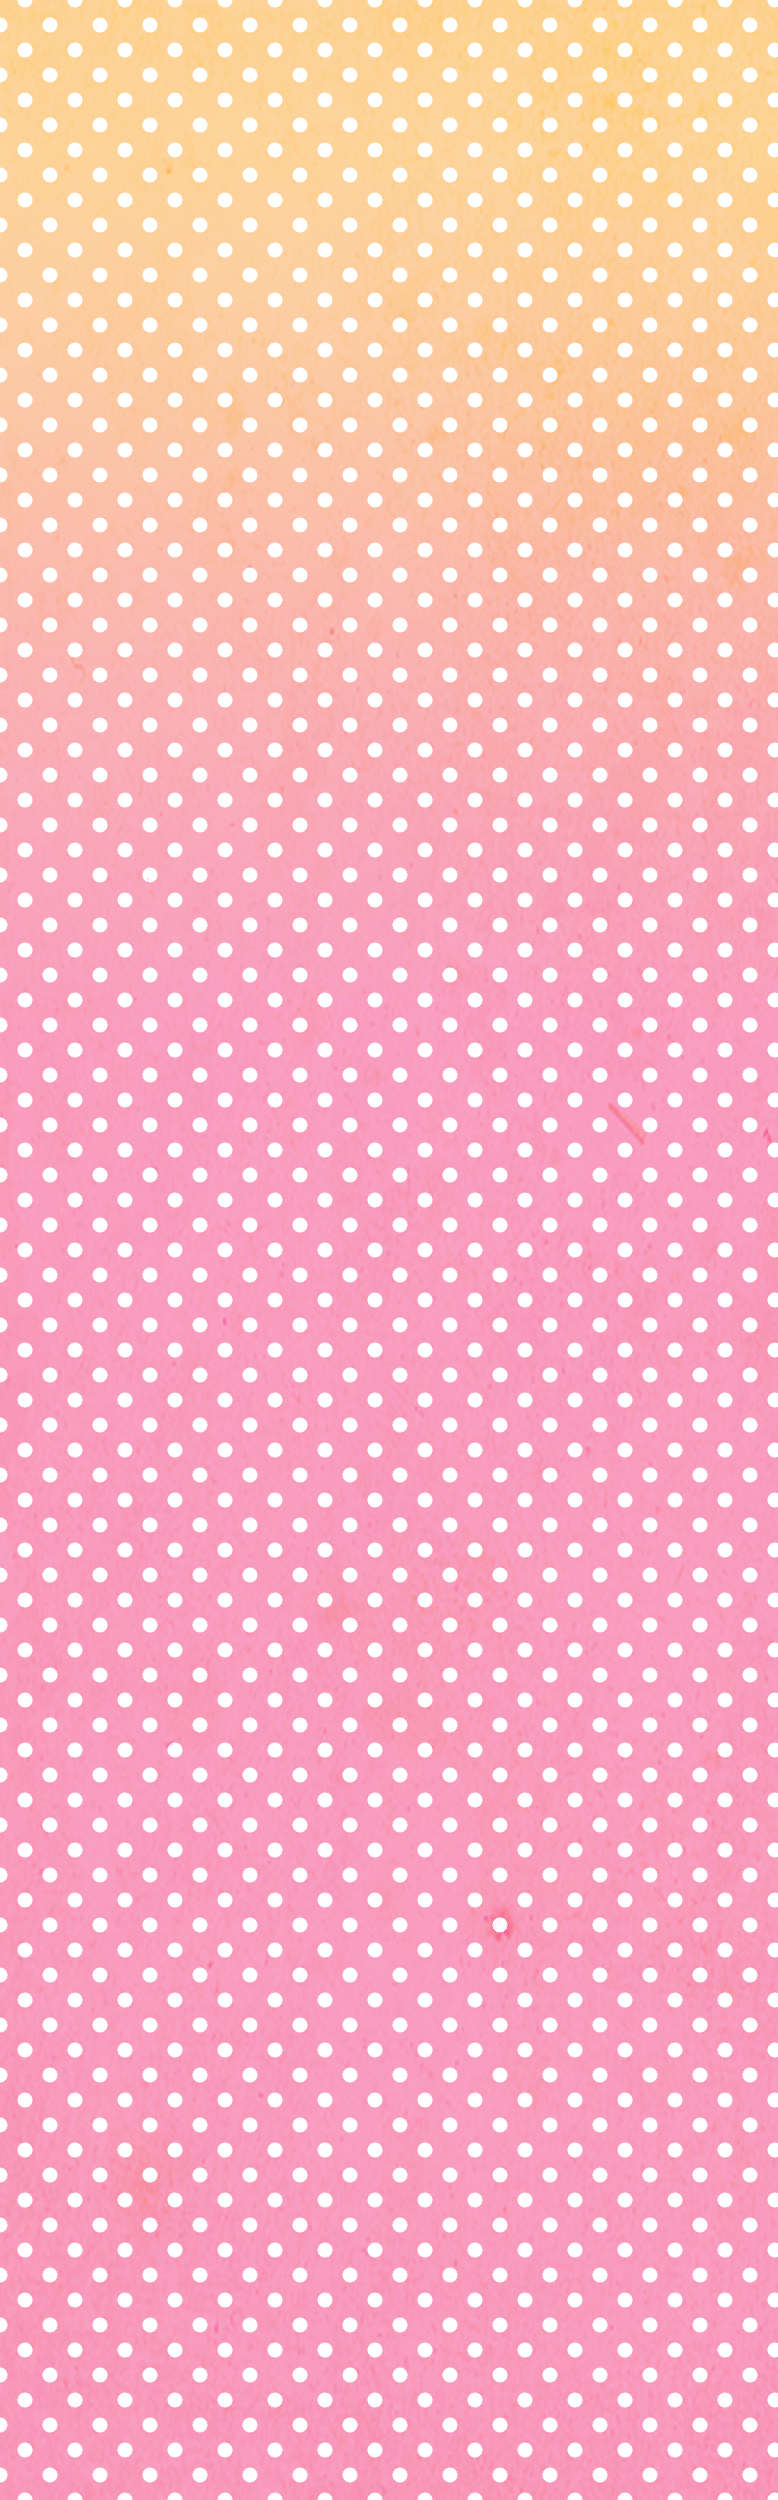 polka_dot_custombox_background_by_demach